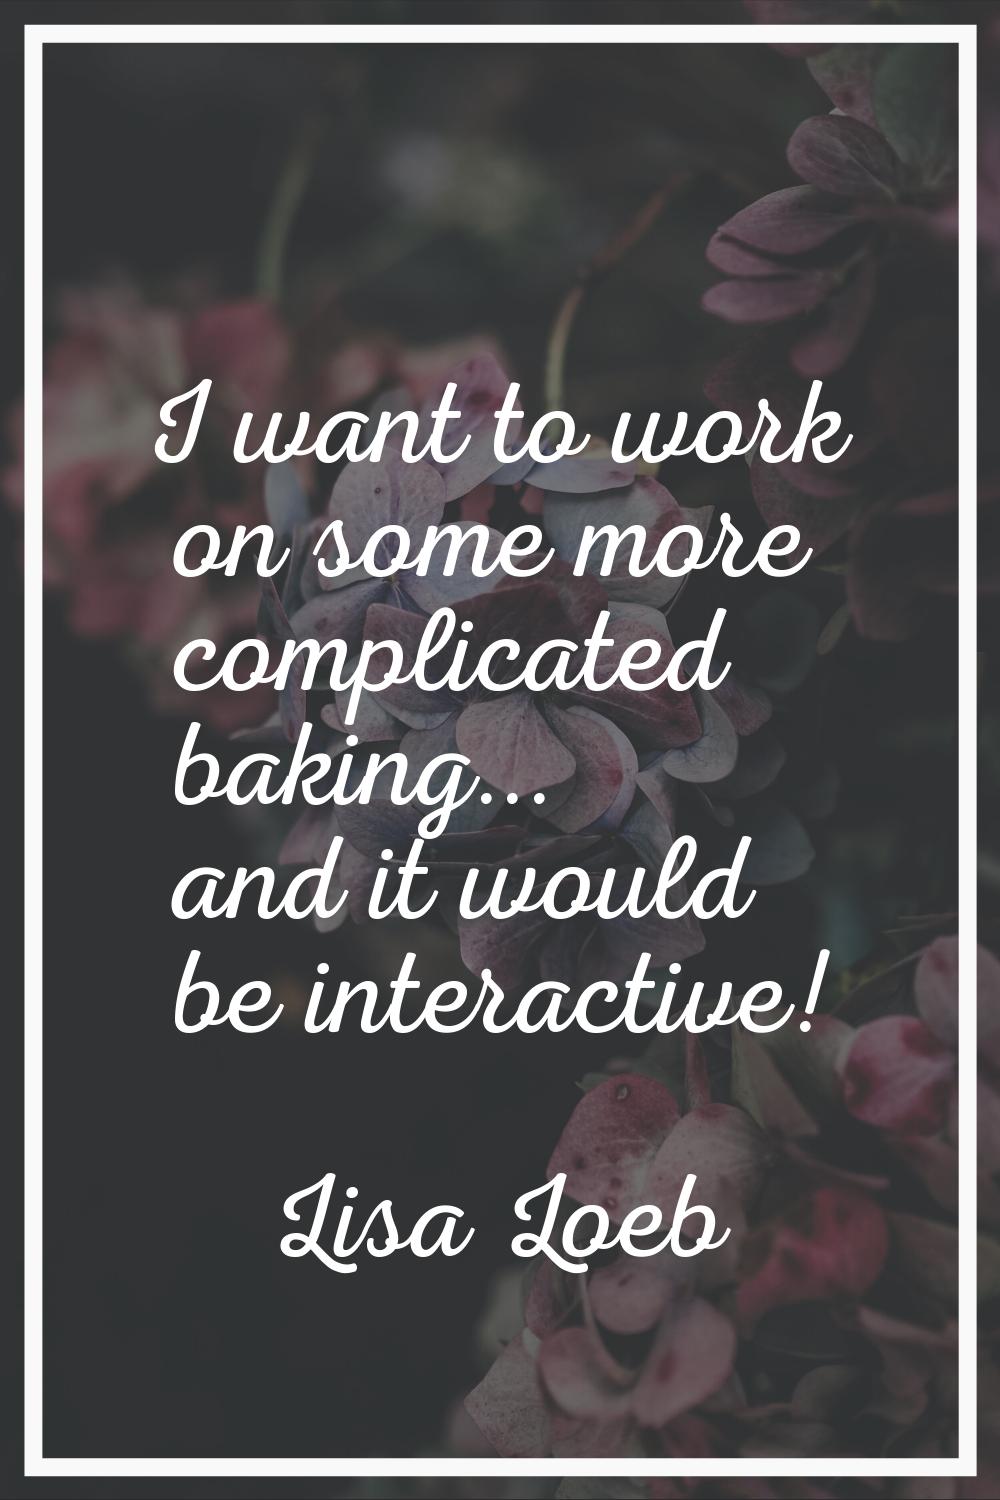 I want to work on some more complicated baking... and it would be interactive!